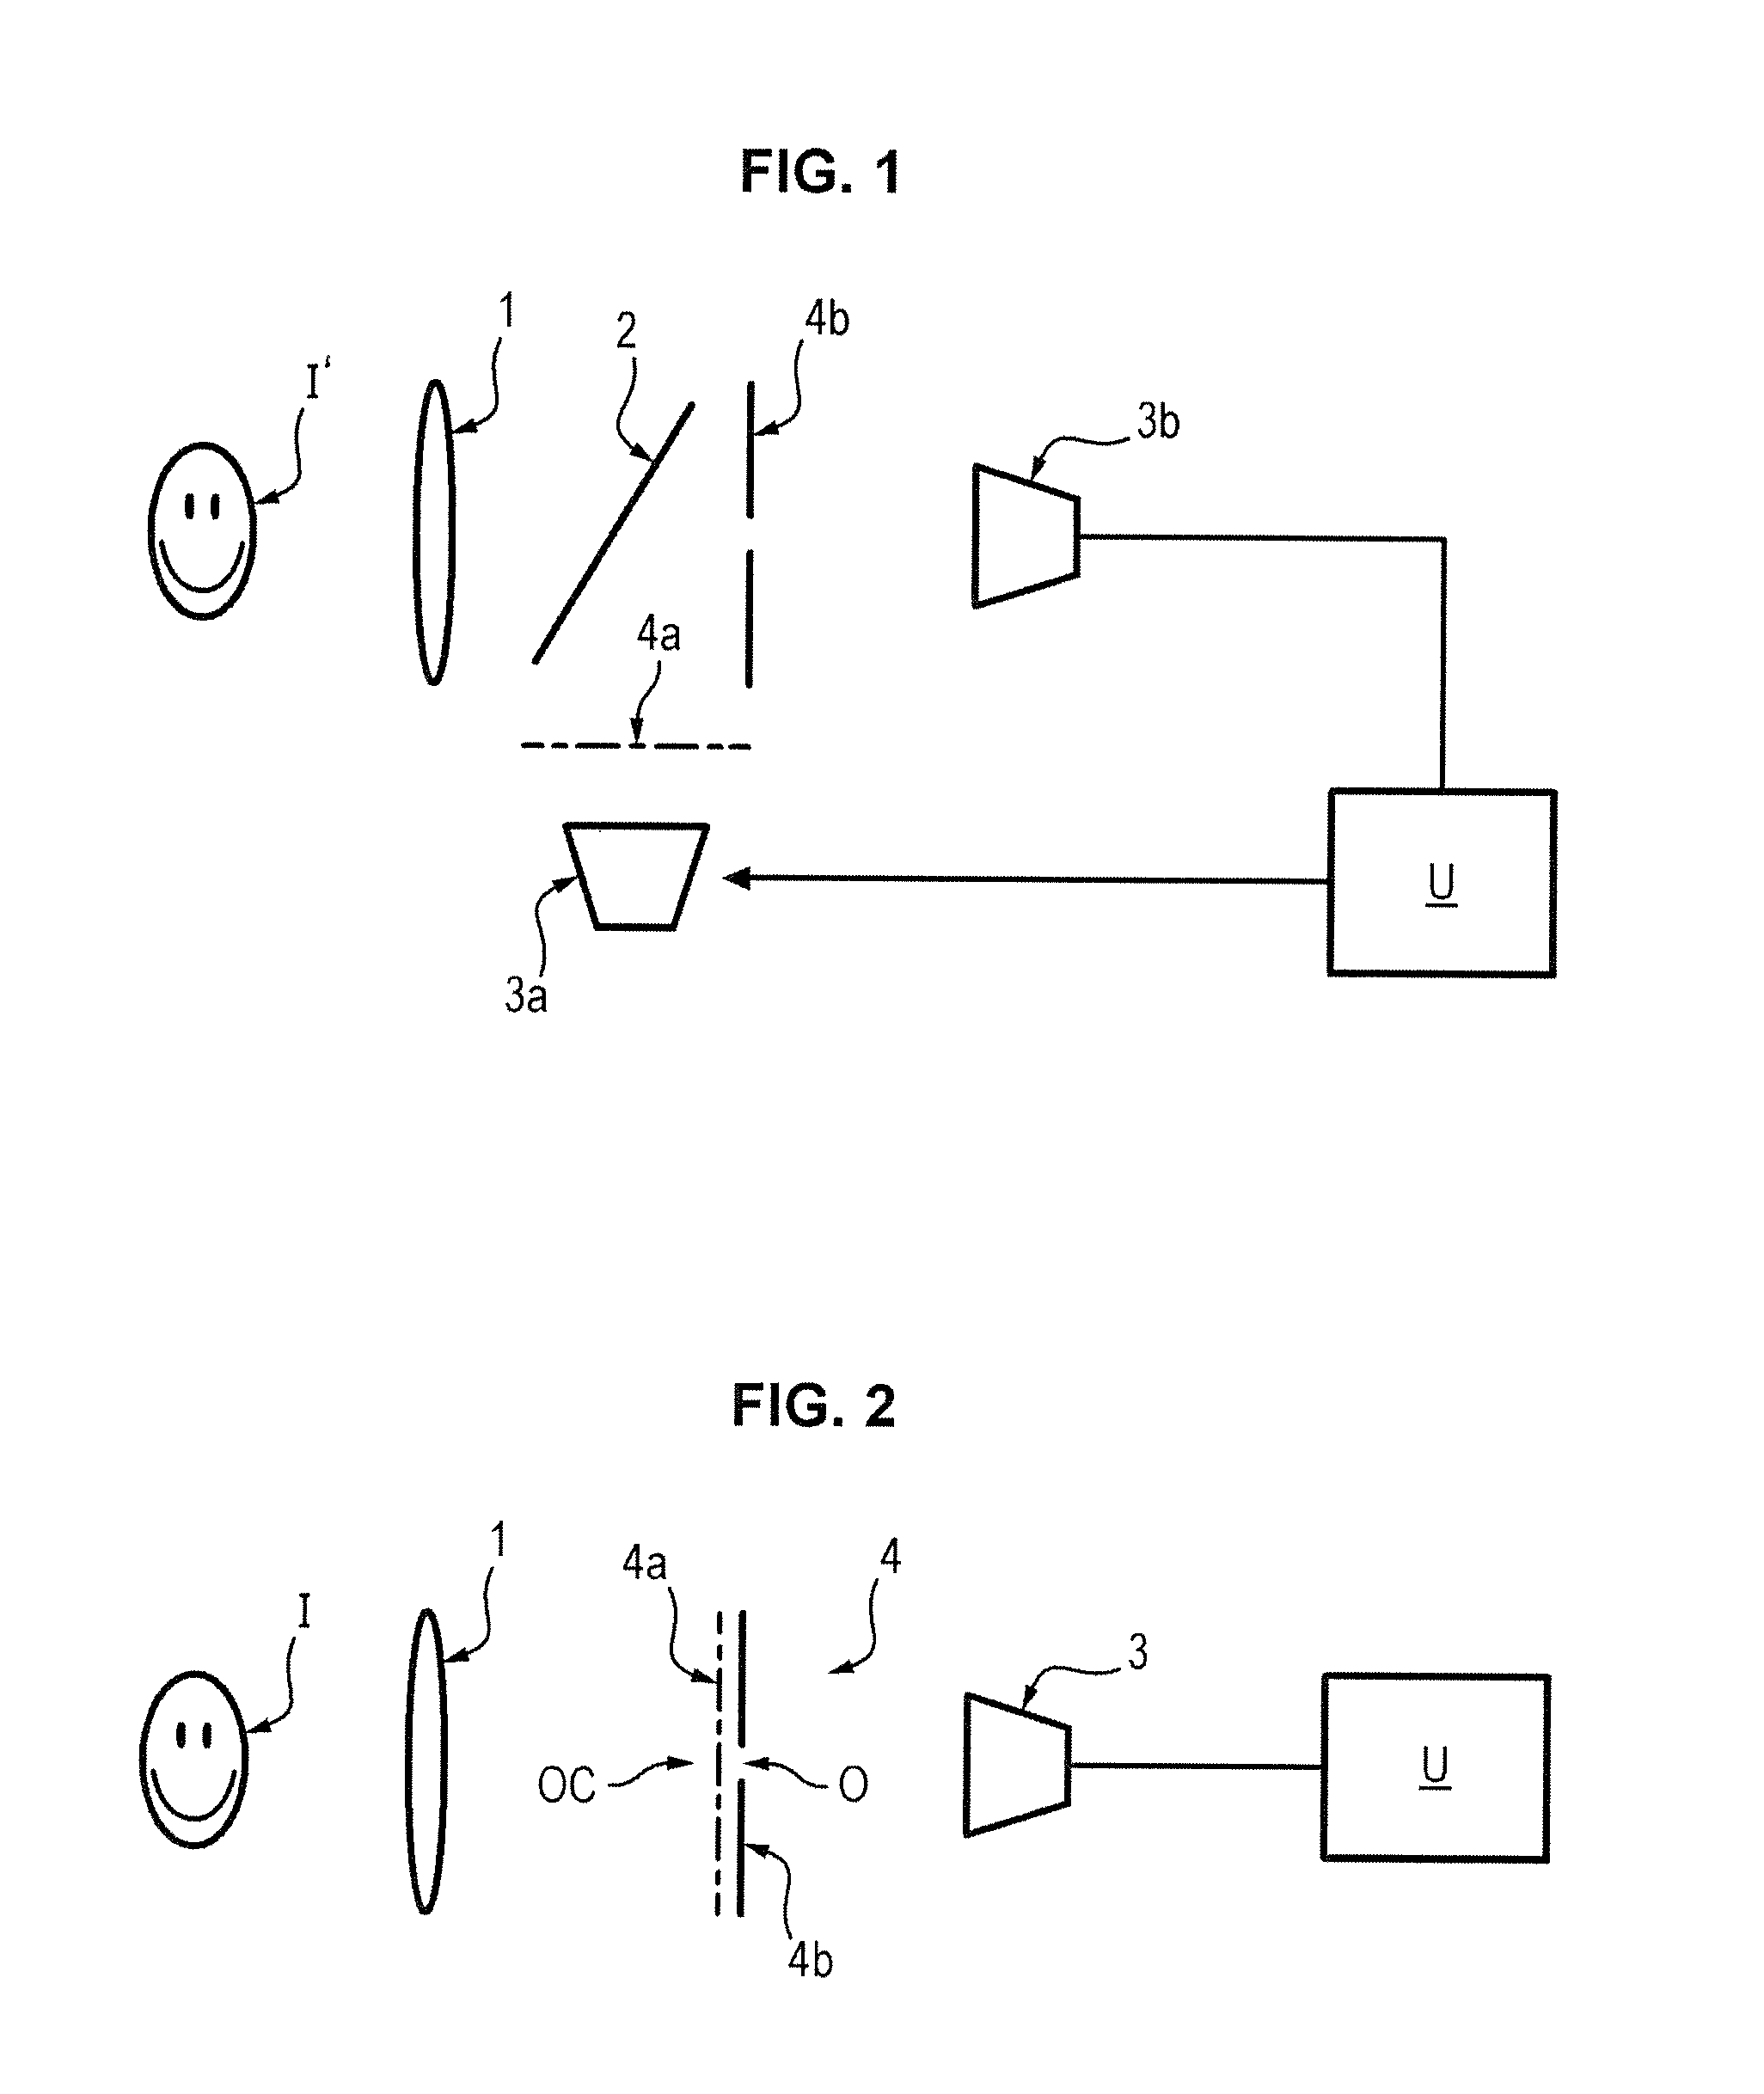 Optical acquisition device for biometric systems